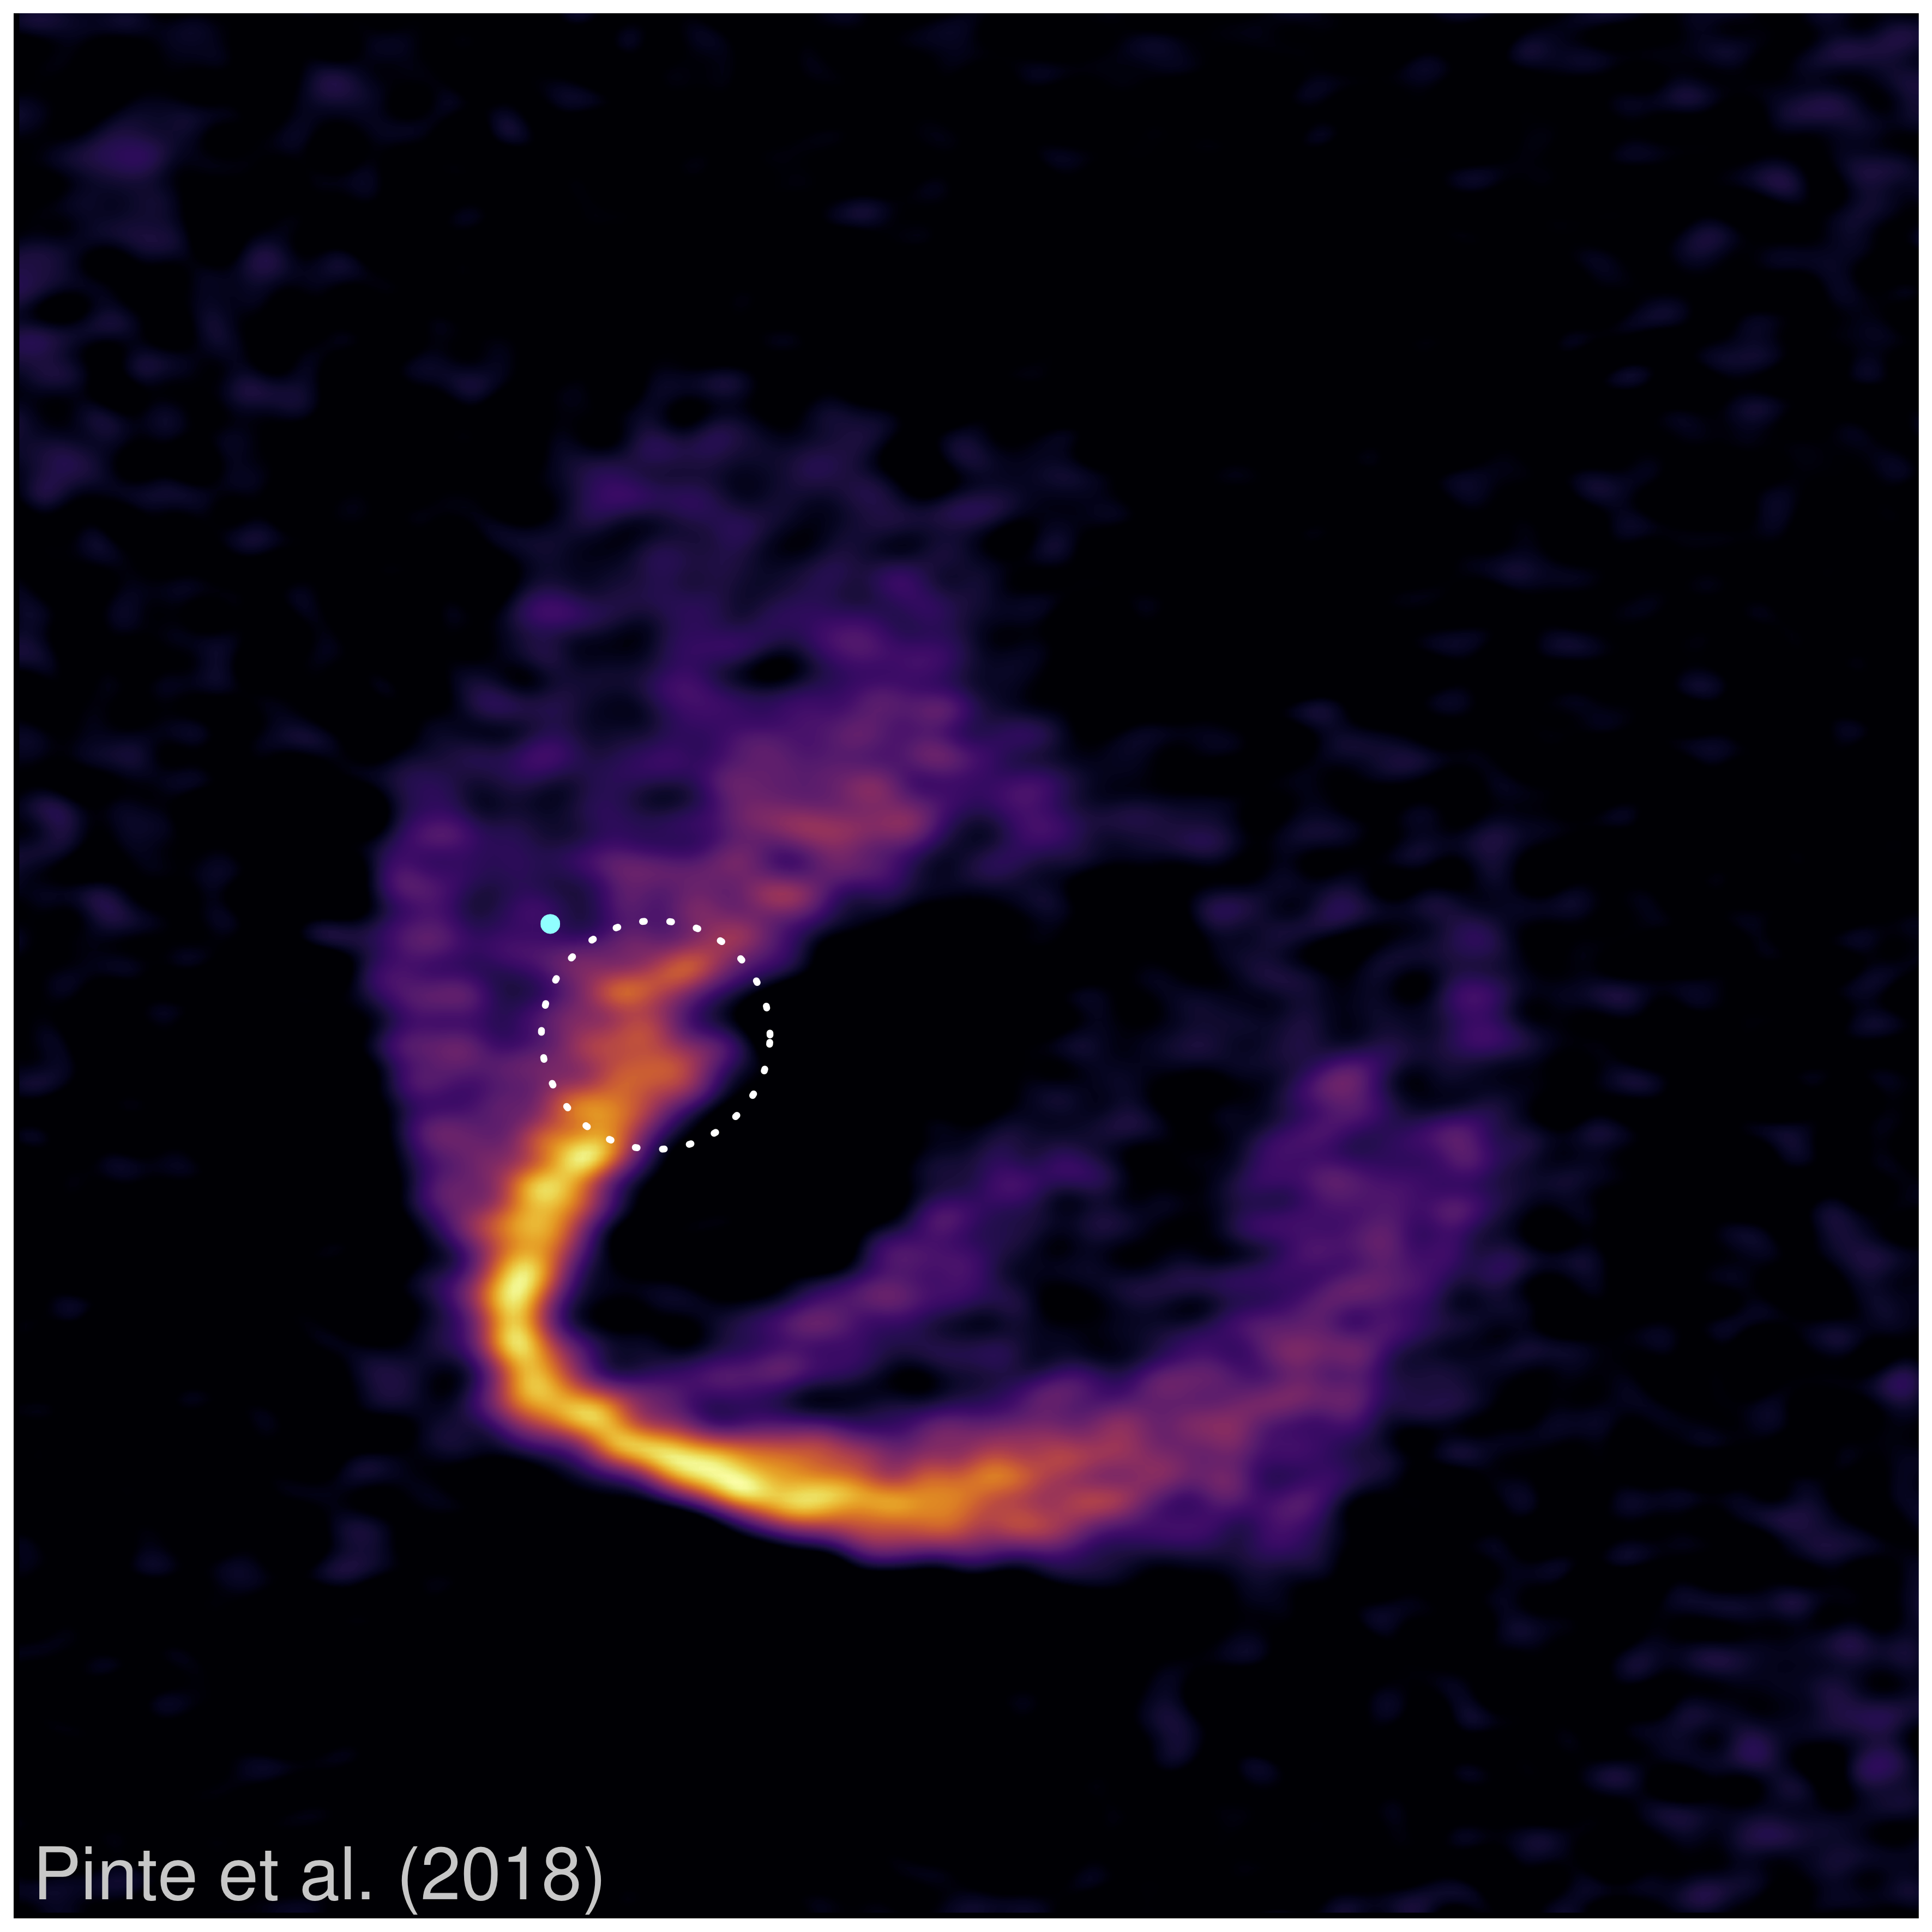 annotated image showing perturbation to velocity field caused by embedded planet in the HD163296 protoplanetary disc